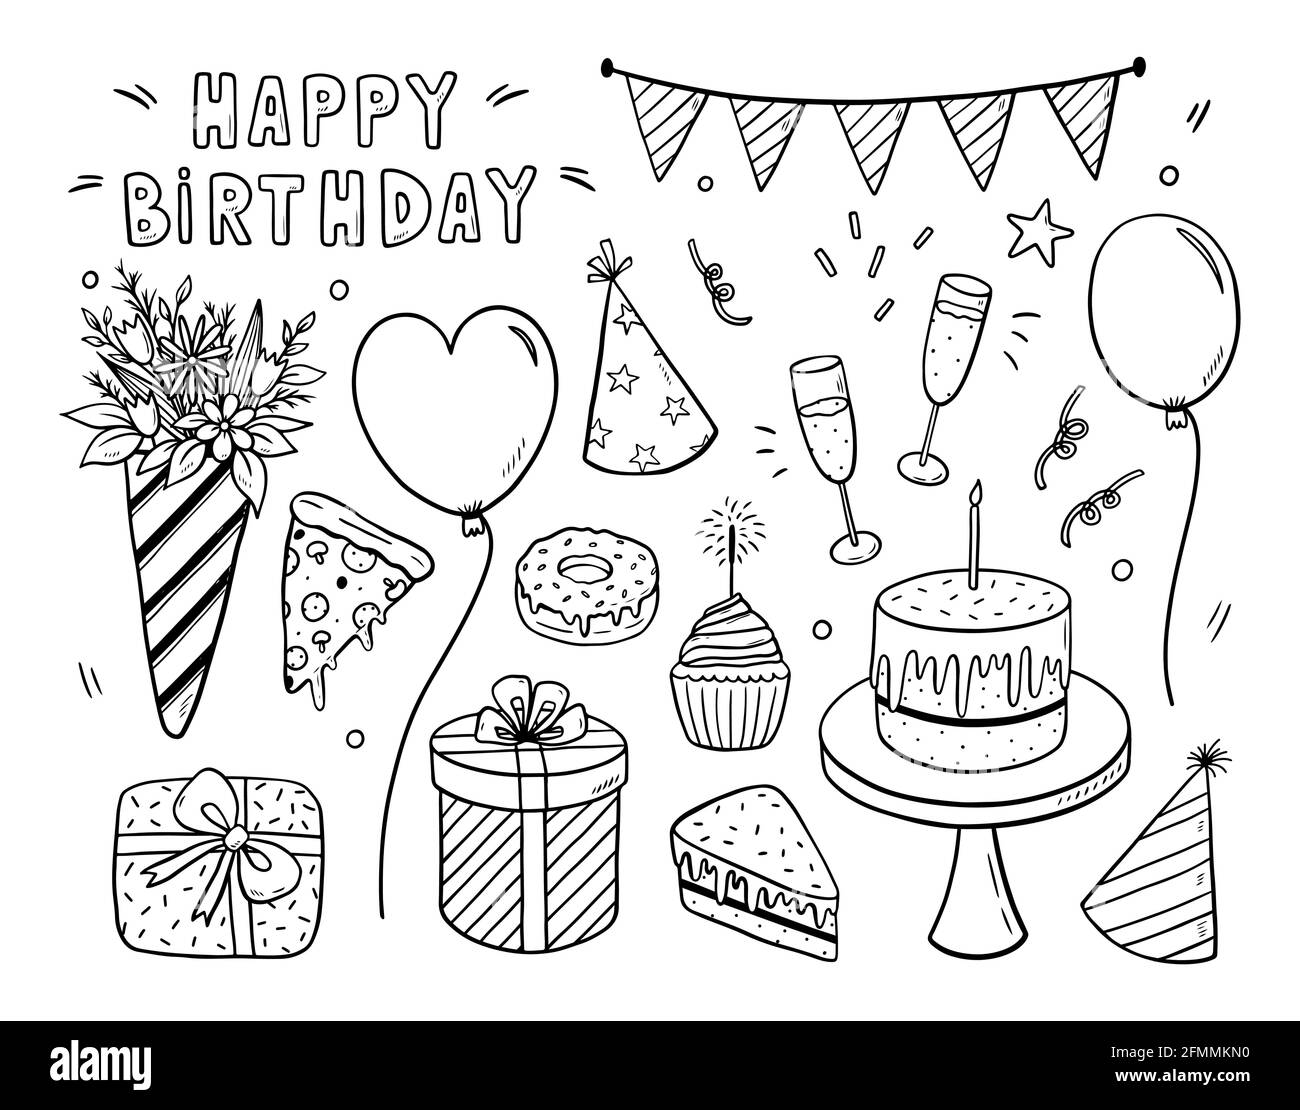 Vector doodle set of birthday design elements. Festive flags, caps, balloons, gifts, flowers, glasses of champagne, confetti, treats and a big birthday cake with a candle. Hand-drawn illustration. Stock Vector